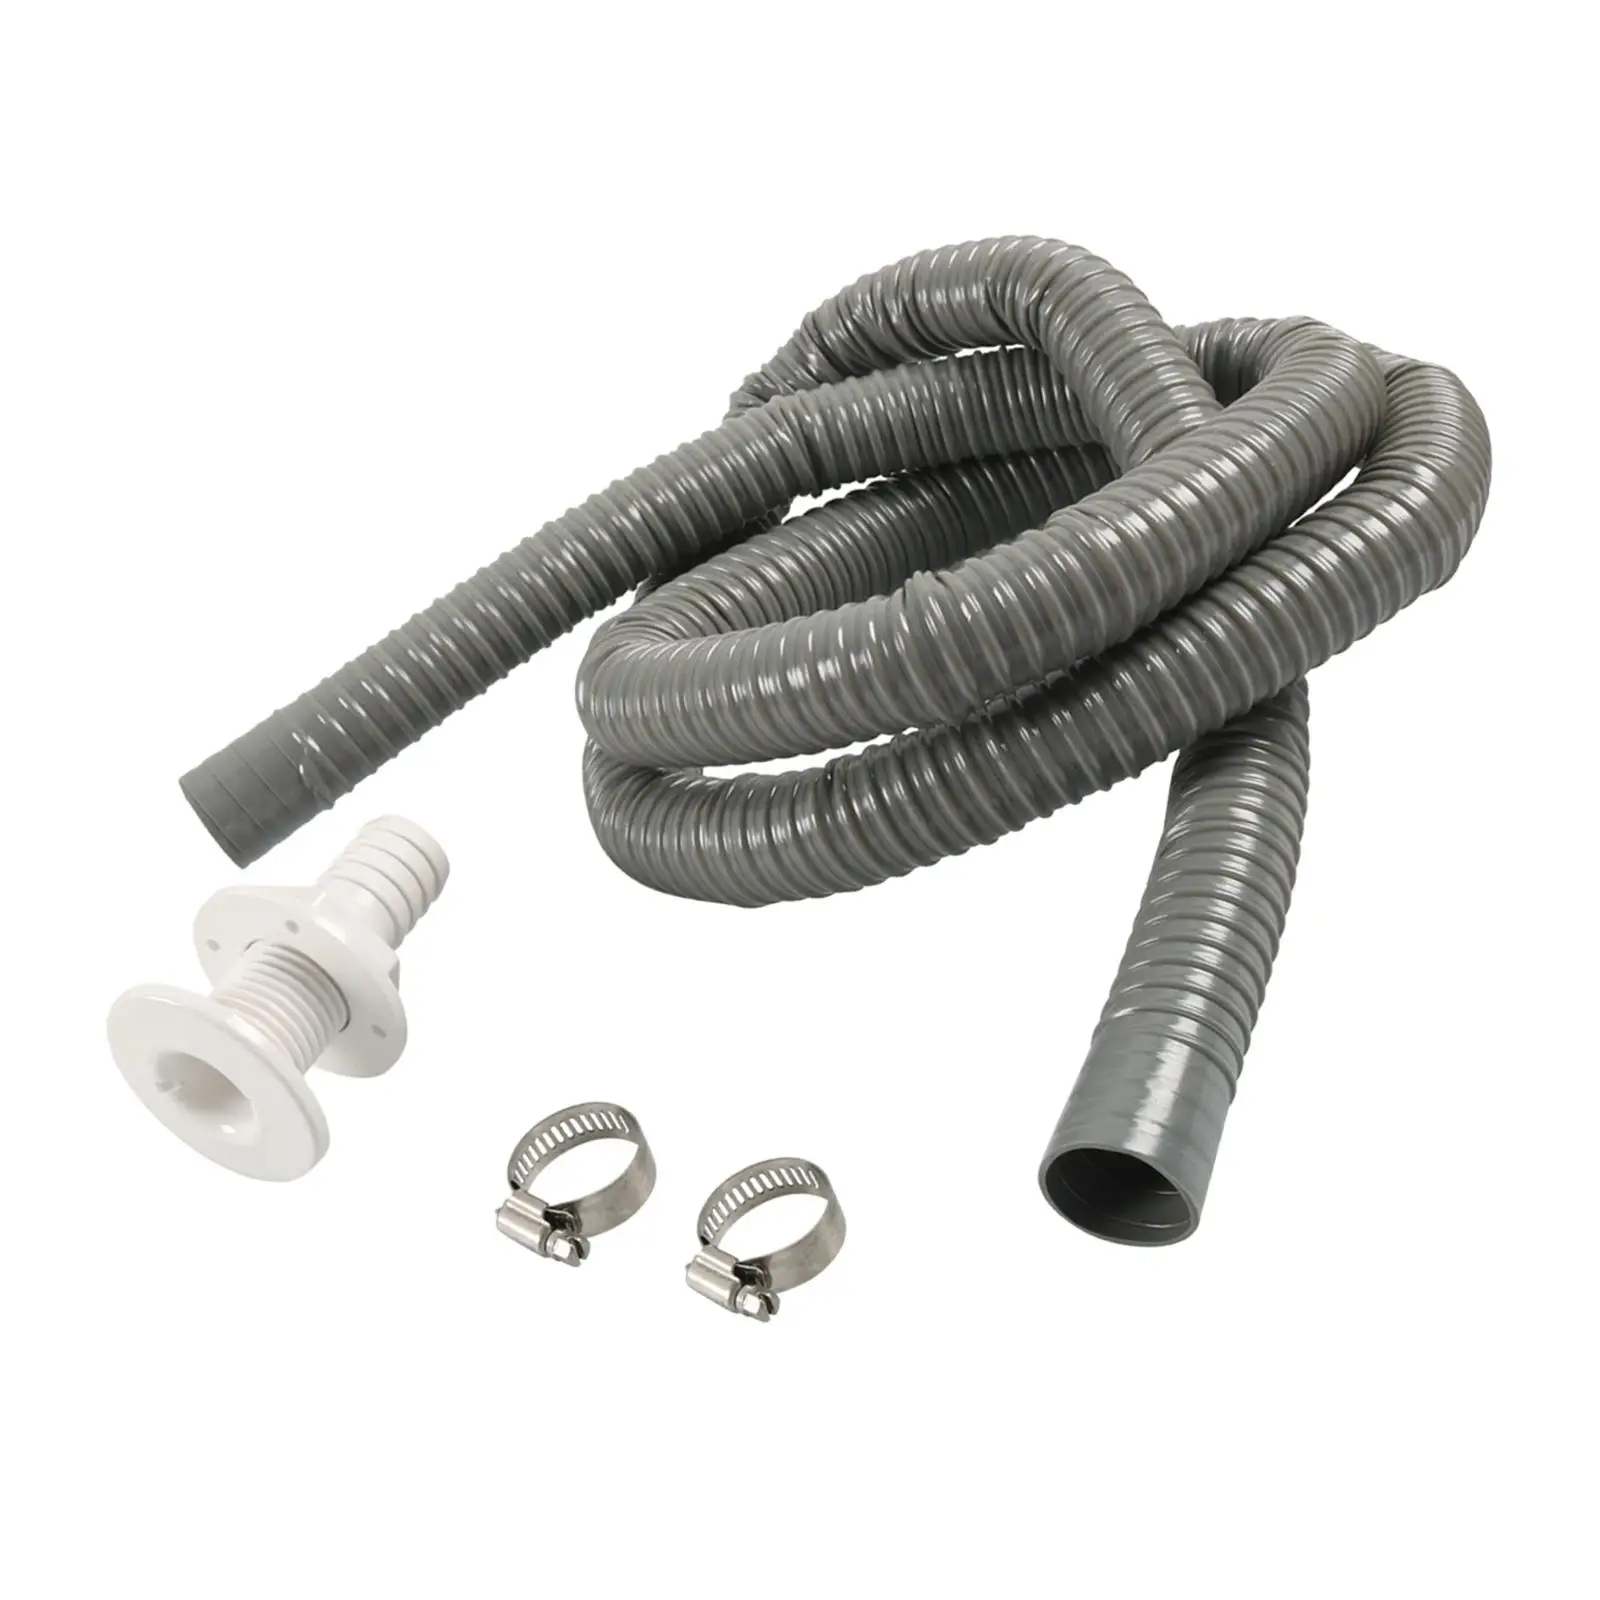 Marine Hose Bilge Pump Installation with thru Hull & 2 Clamps Kink Free 1-1/2-Inch Dia Plumbing Flexible for Boats